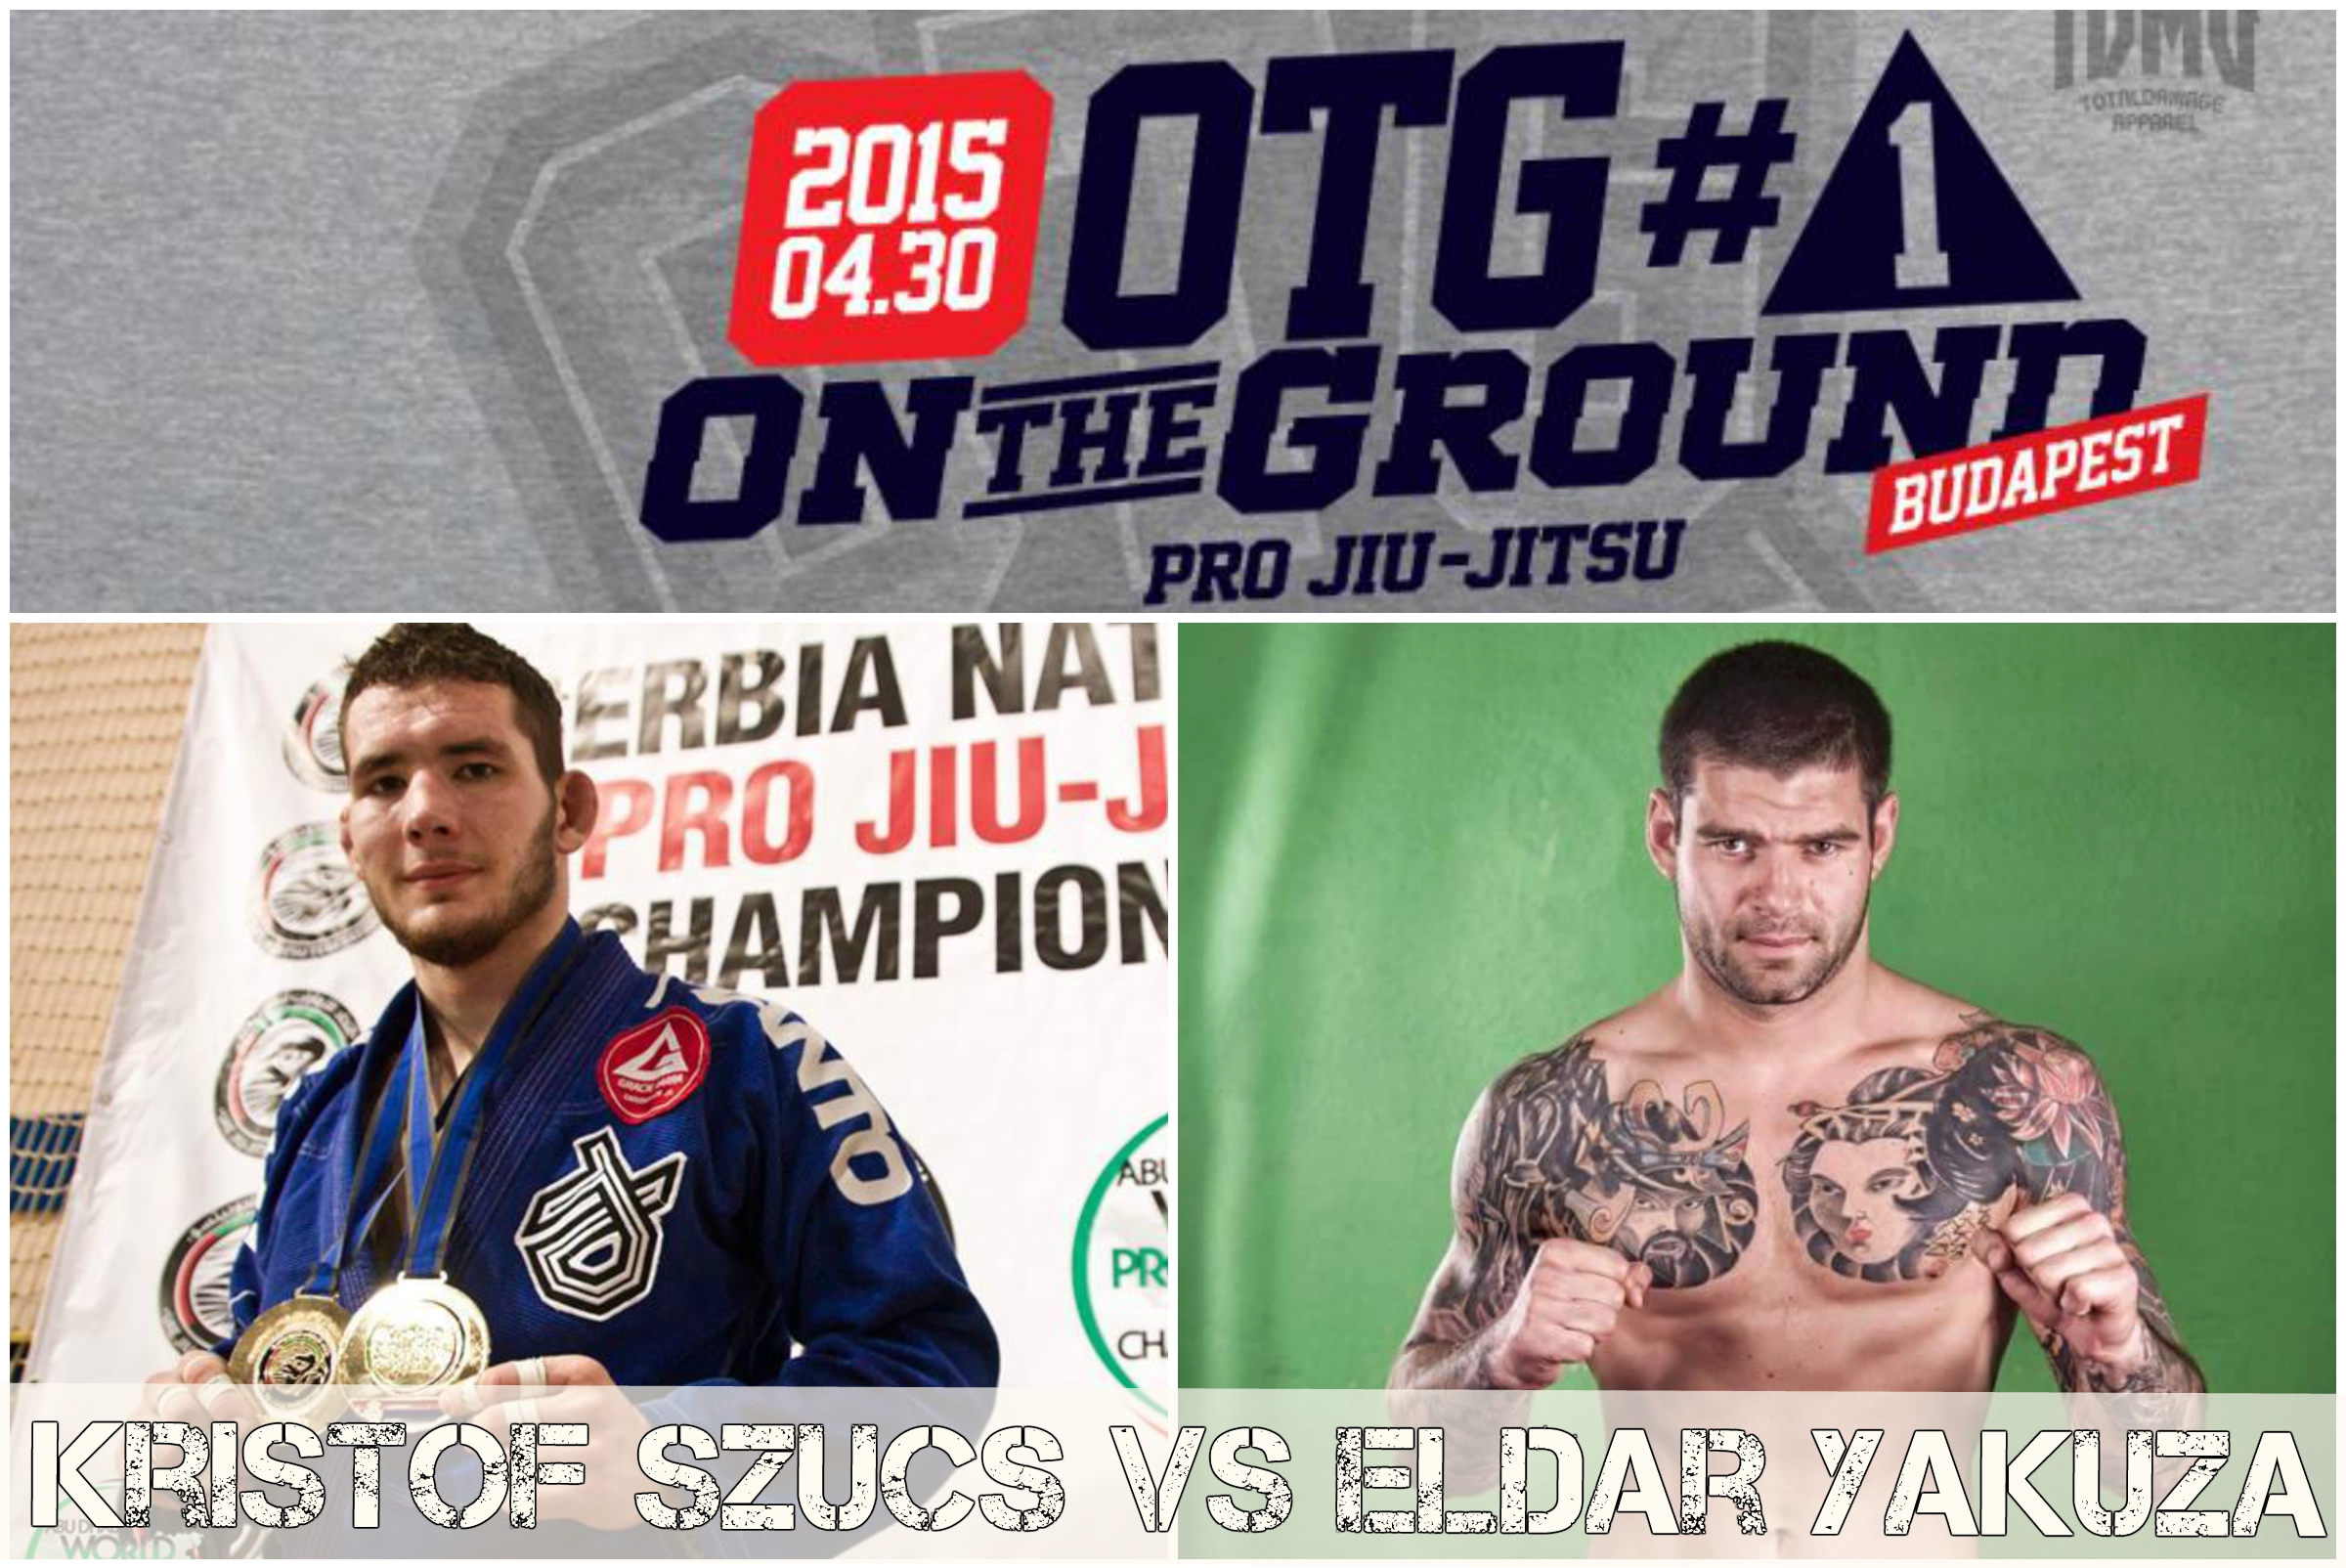 On The Ground: Hungary’s First Sub Only Invitational 30.04.15